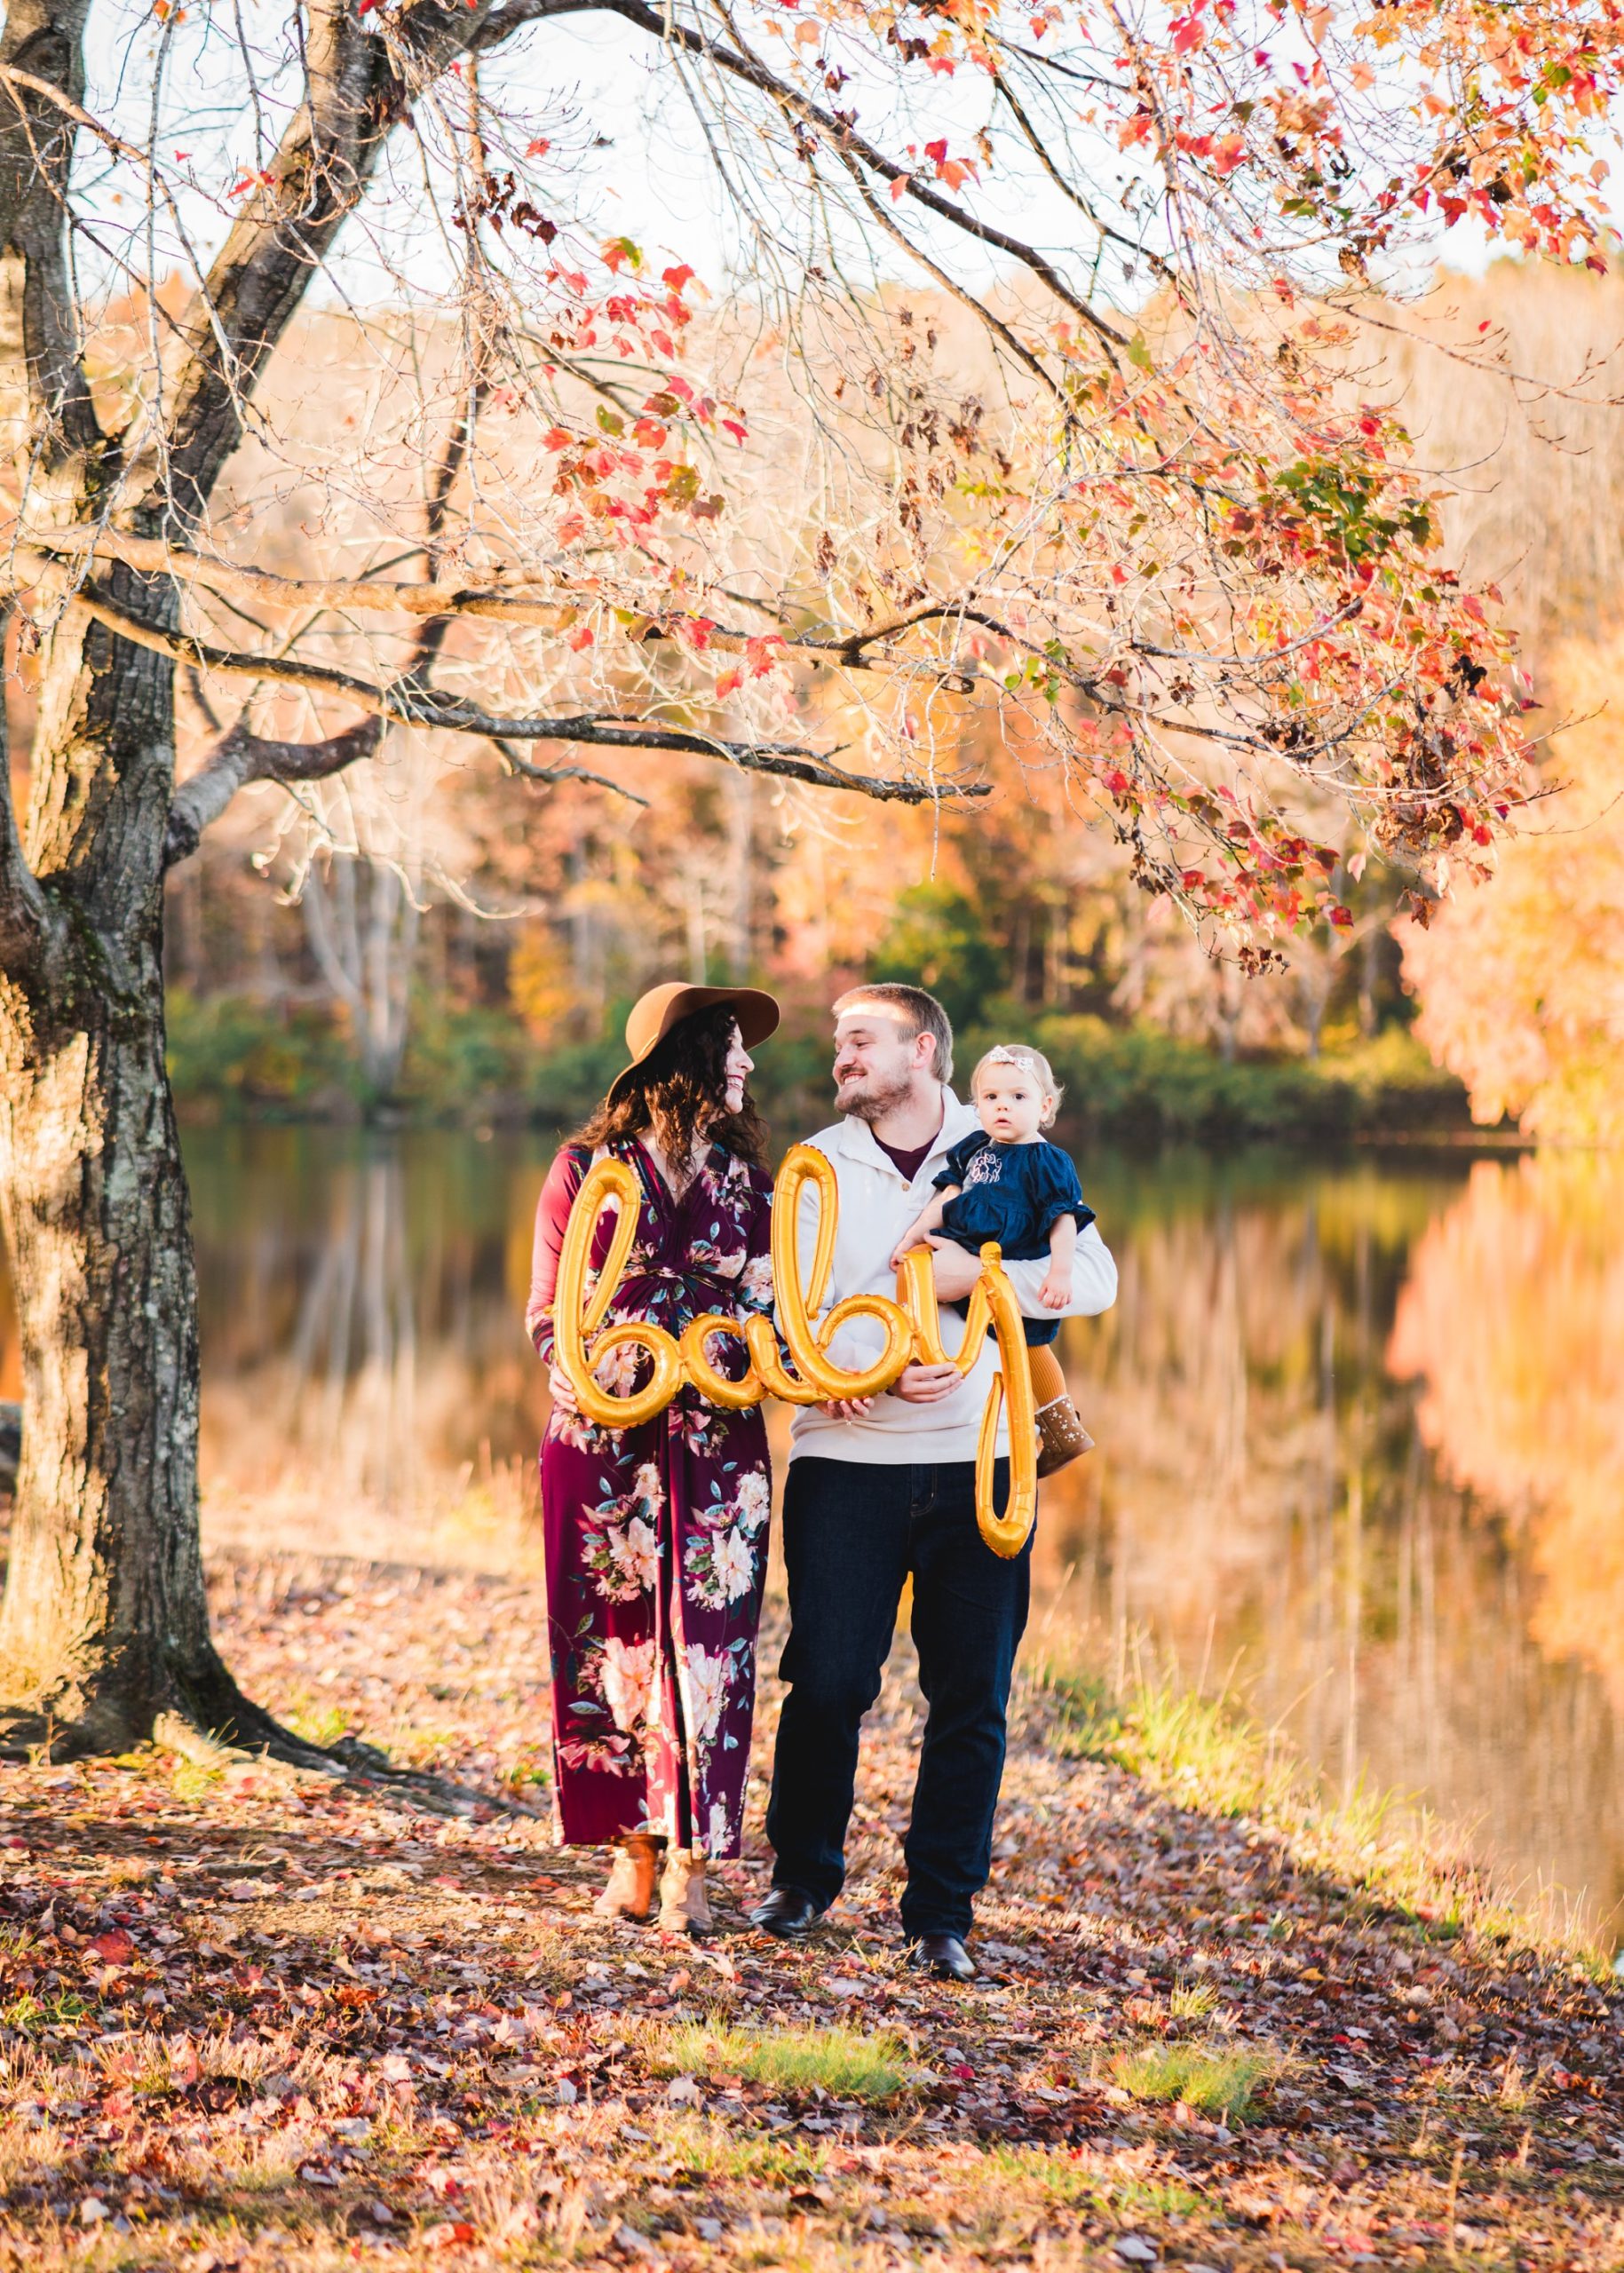 couple holding balloon that says baby in fall setting | Photographers in Charlottesville